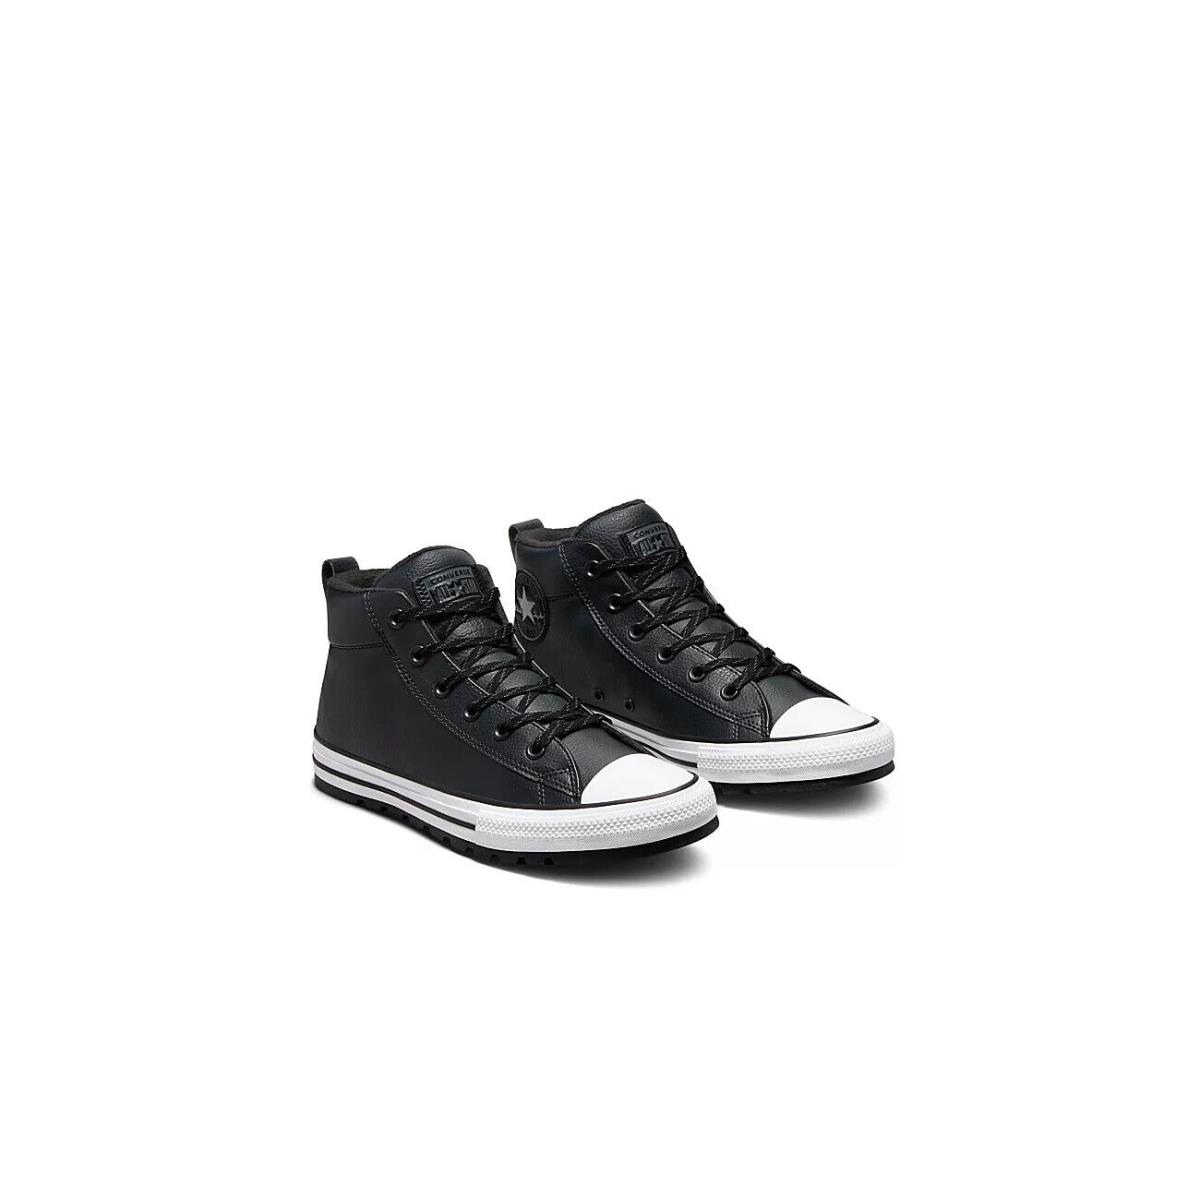 Converse shoes All Star Street Boot - Black 1